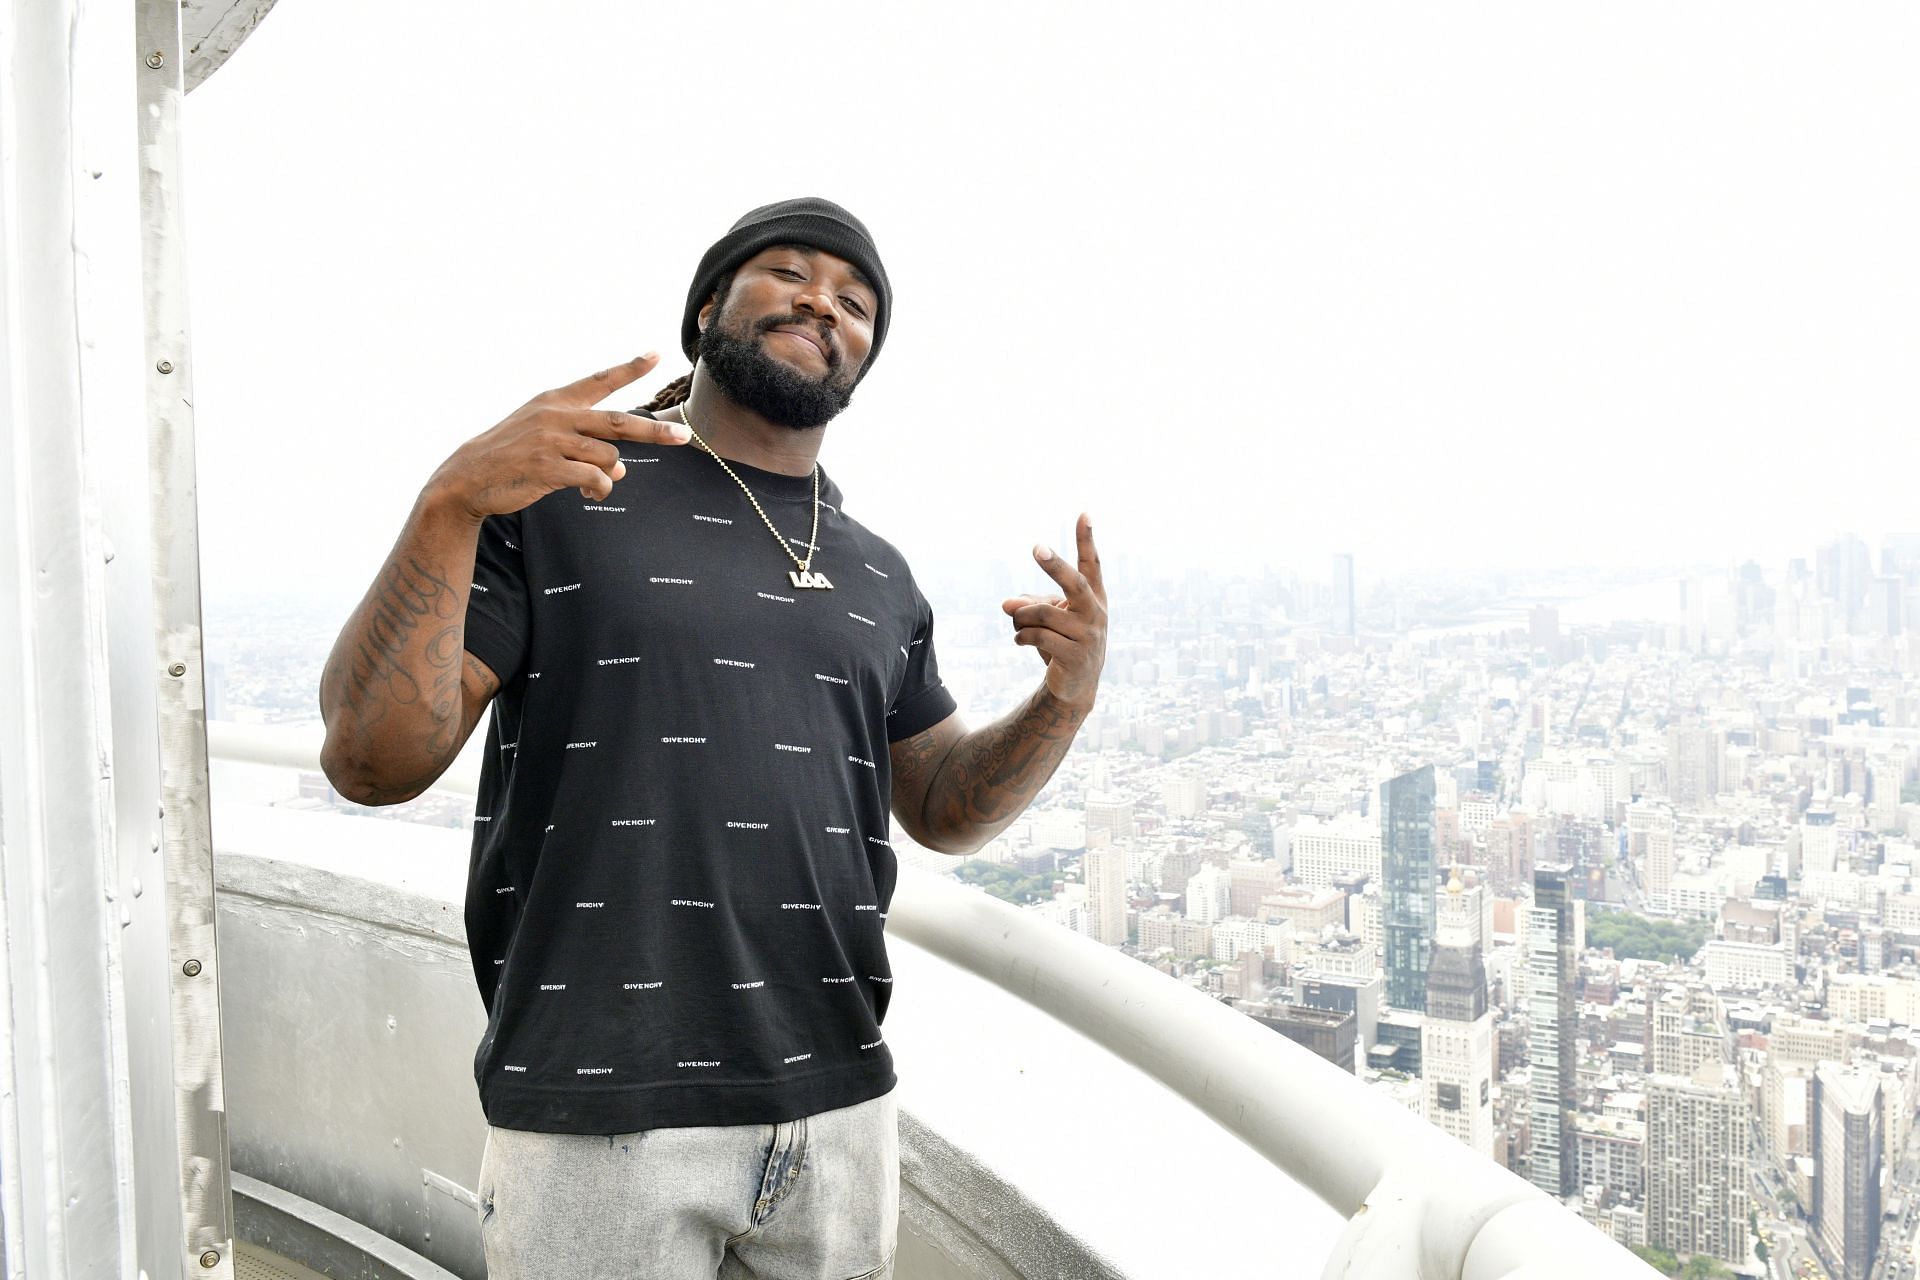 Dalvin Cook Visits the Empire State Building